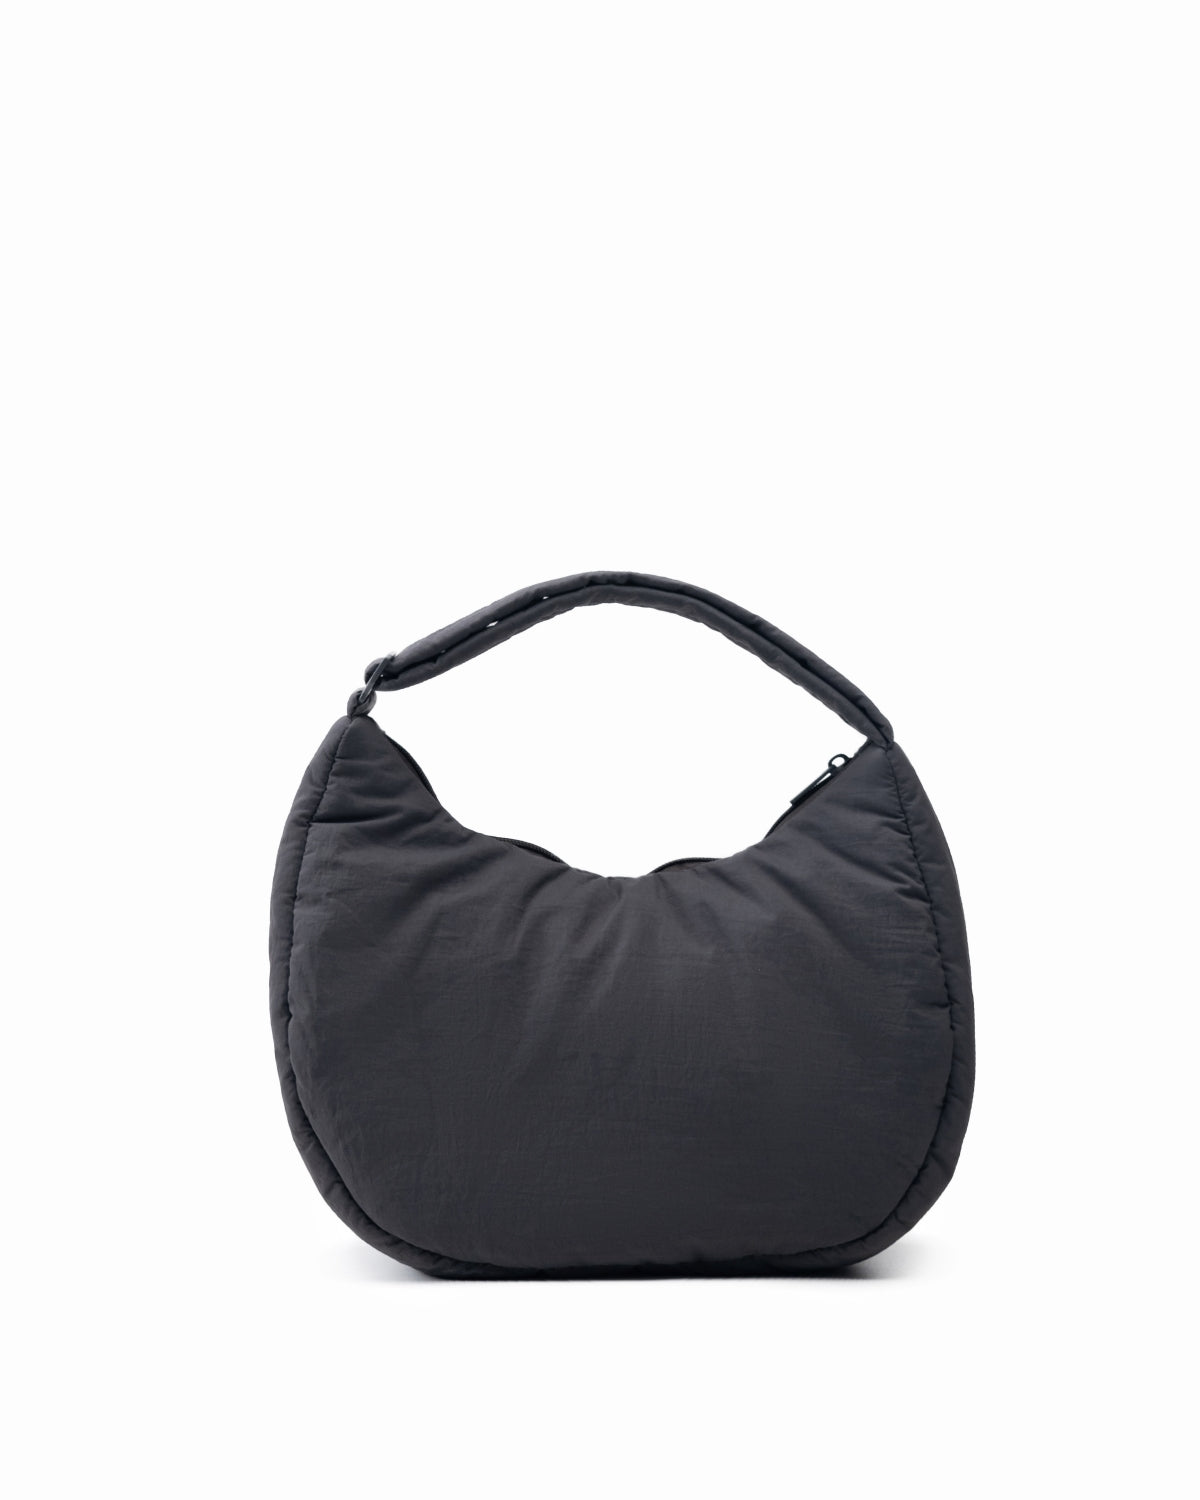 COSY FORTUNE COOKIE BAG IN SMOKEY